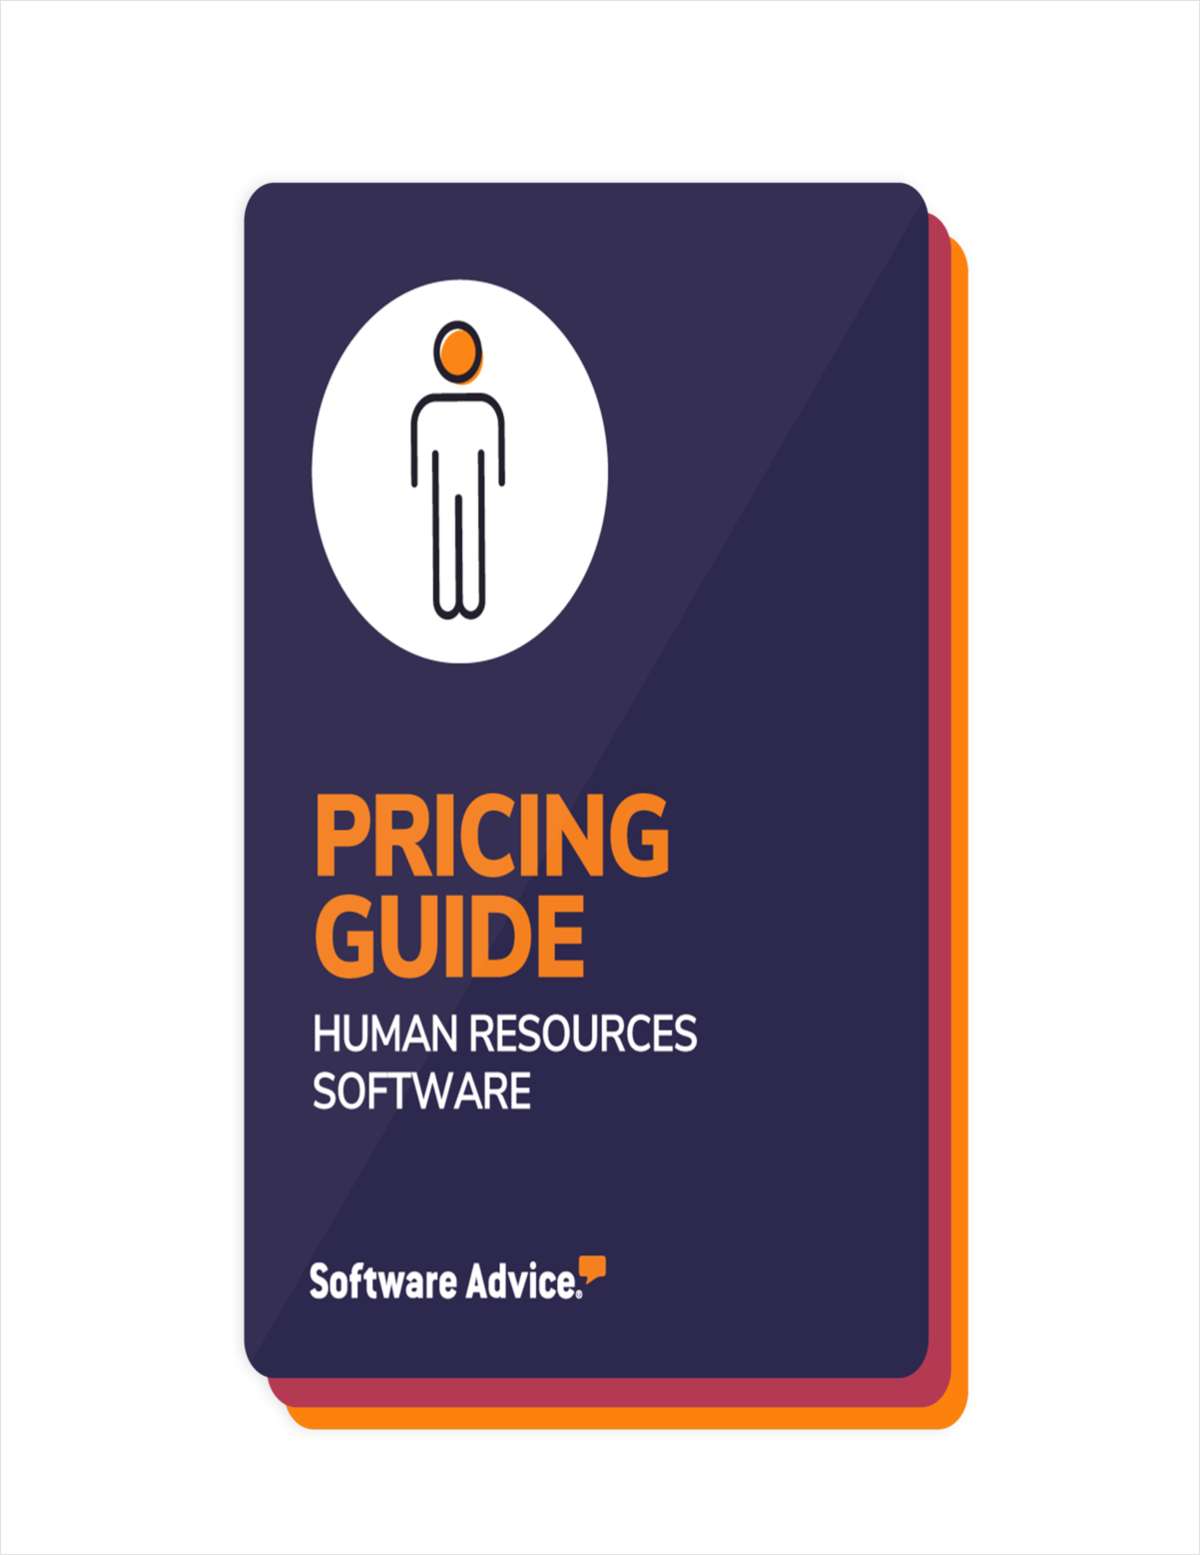 Don't Overpay: What to Know About HR Software Prices in 2022